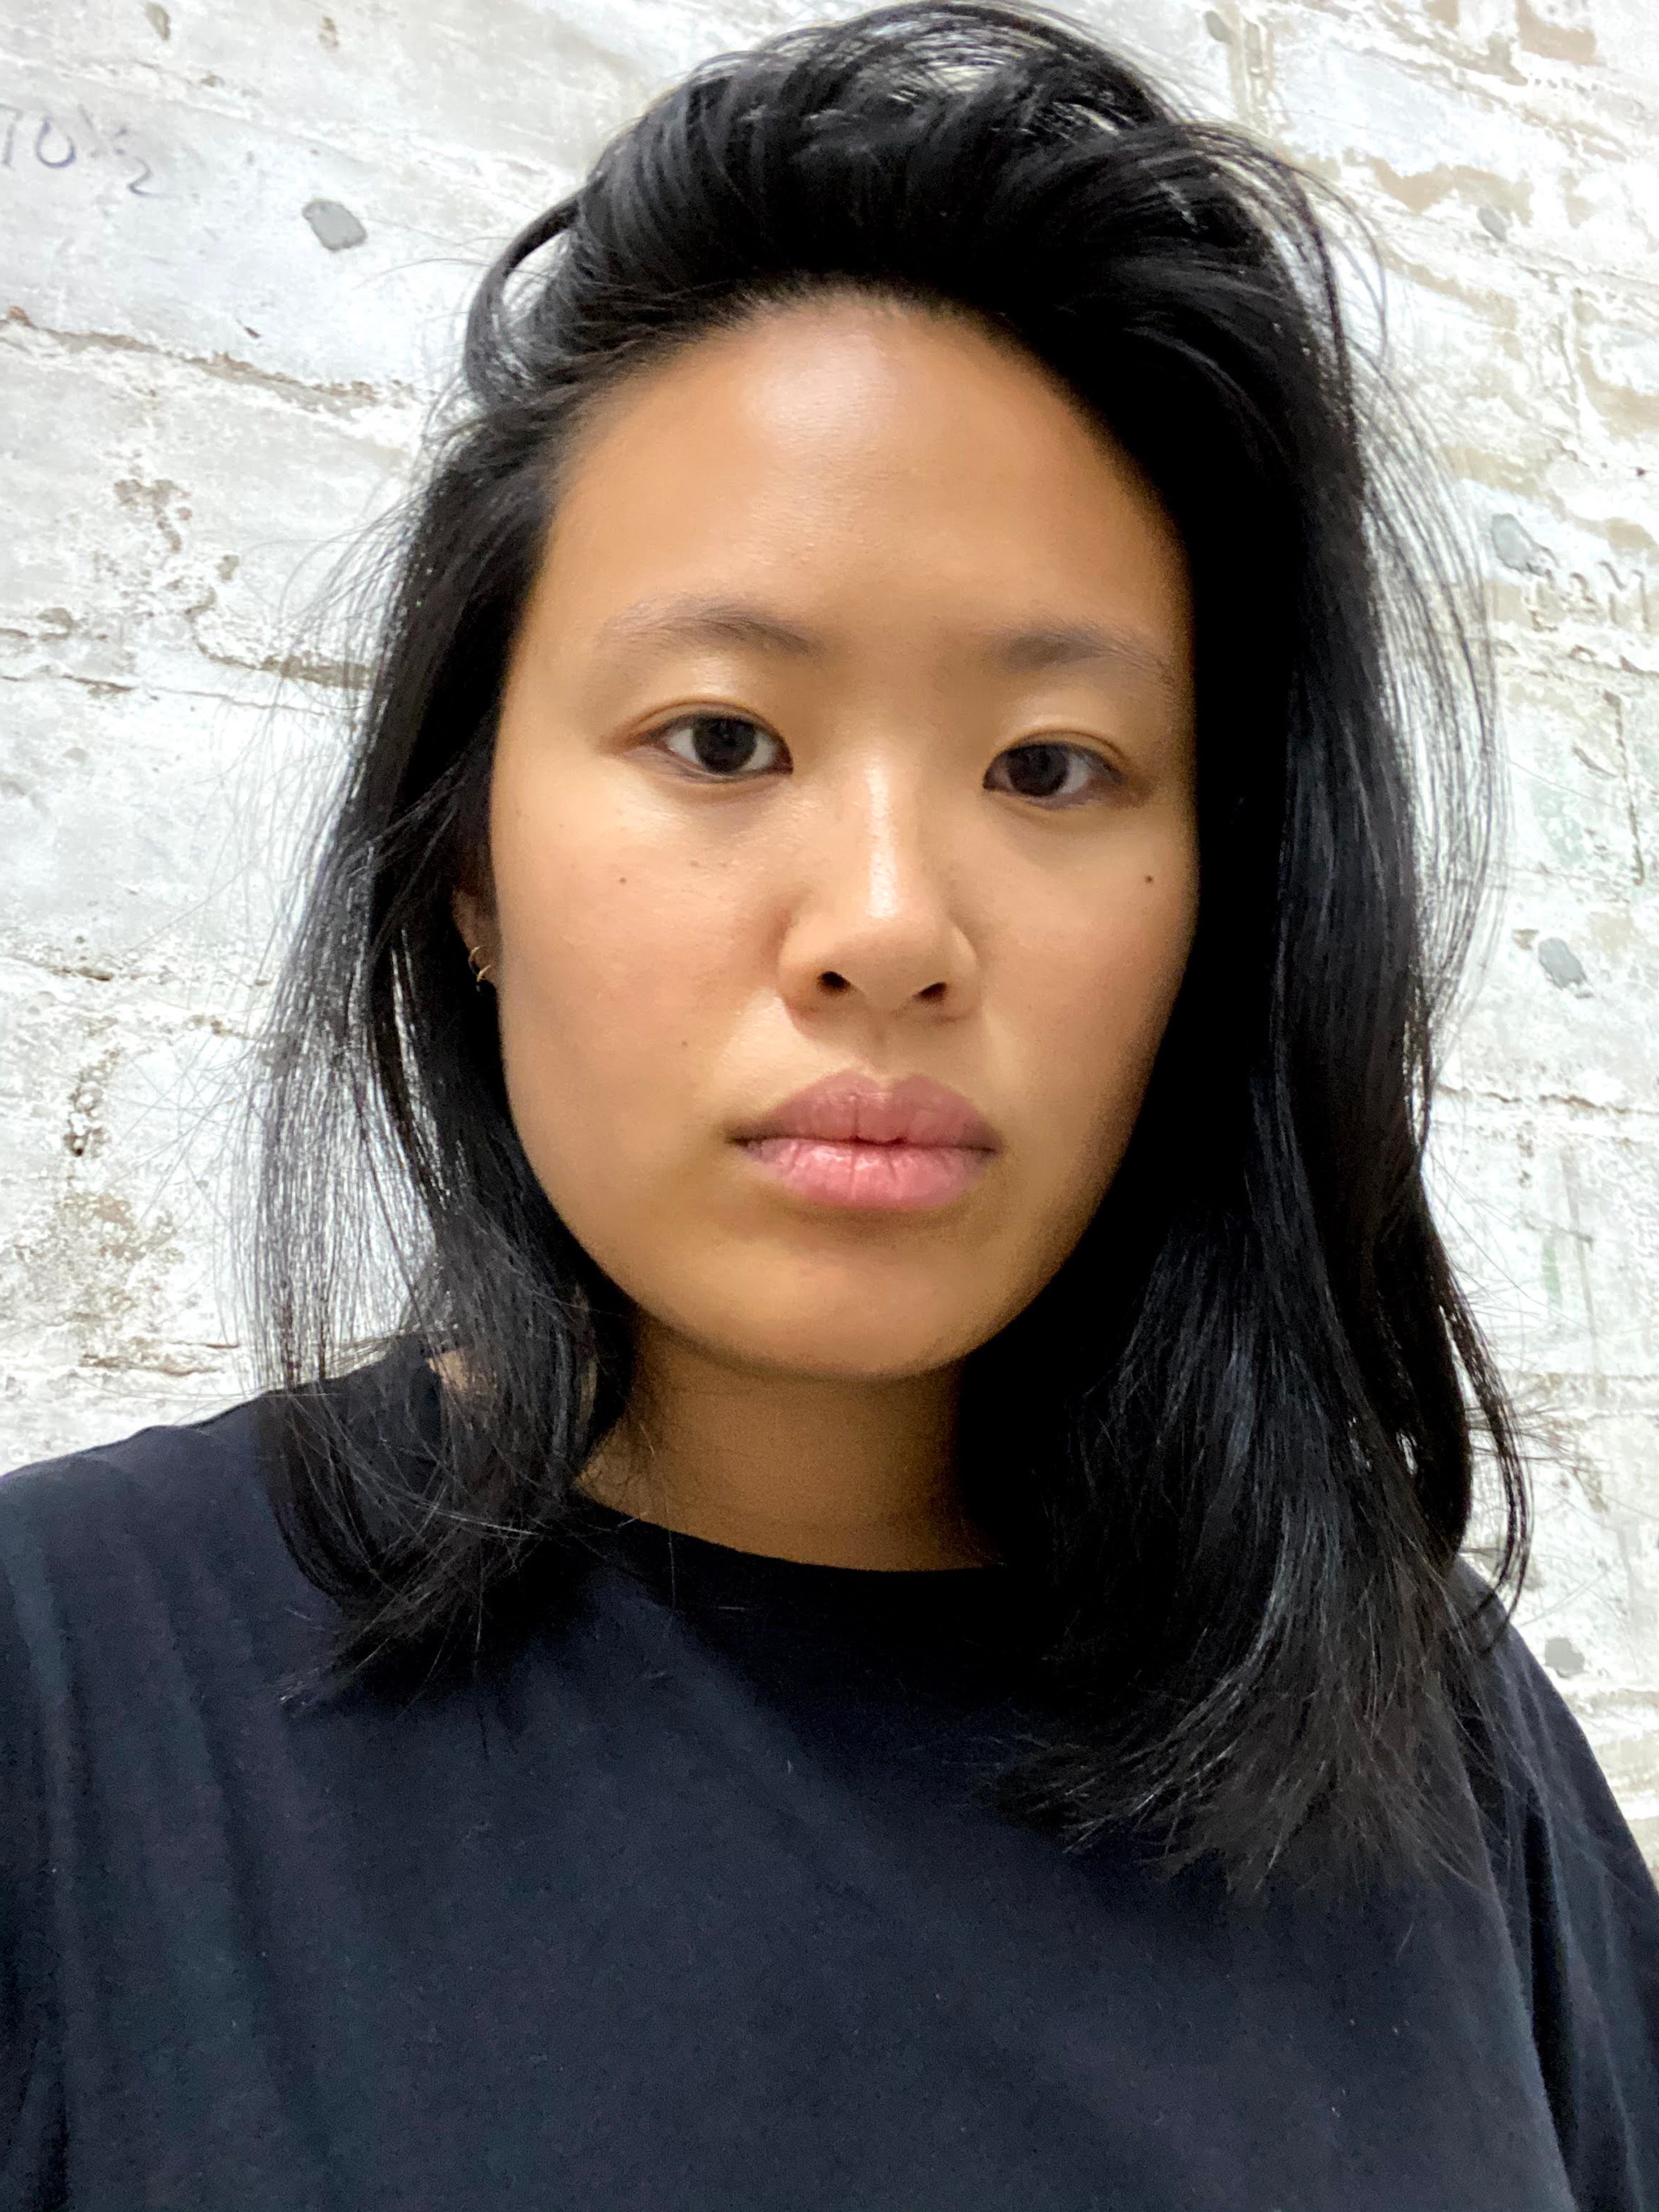 A photo of the artist Pauline Shaw looking into the camera. Shaw's hair is parted to the side and she is in front of a whitewashed brick wall.